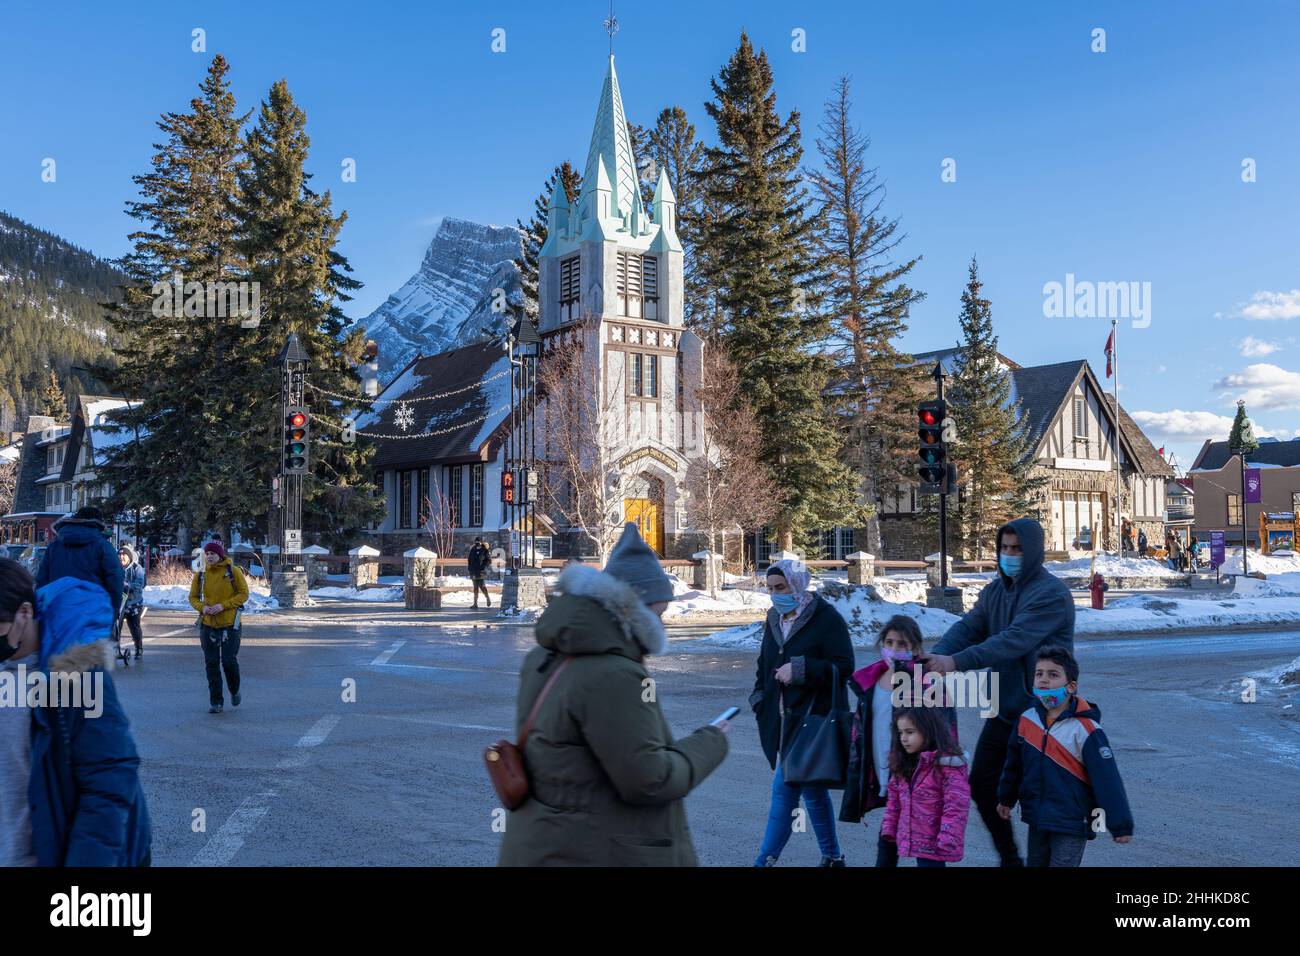 Banff, Alberta, Canada - January 23 2022 : Downtown Banff Avenue in winter. Pedestrians are crossing the road during covid-19 pandemic period. Stock Photo